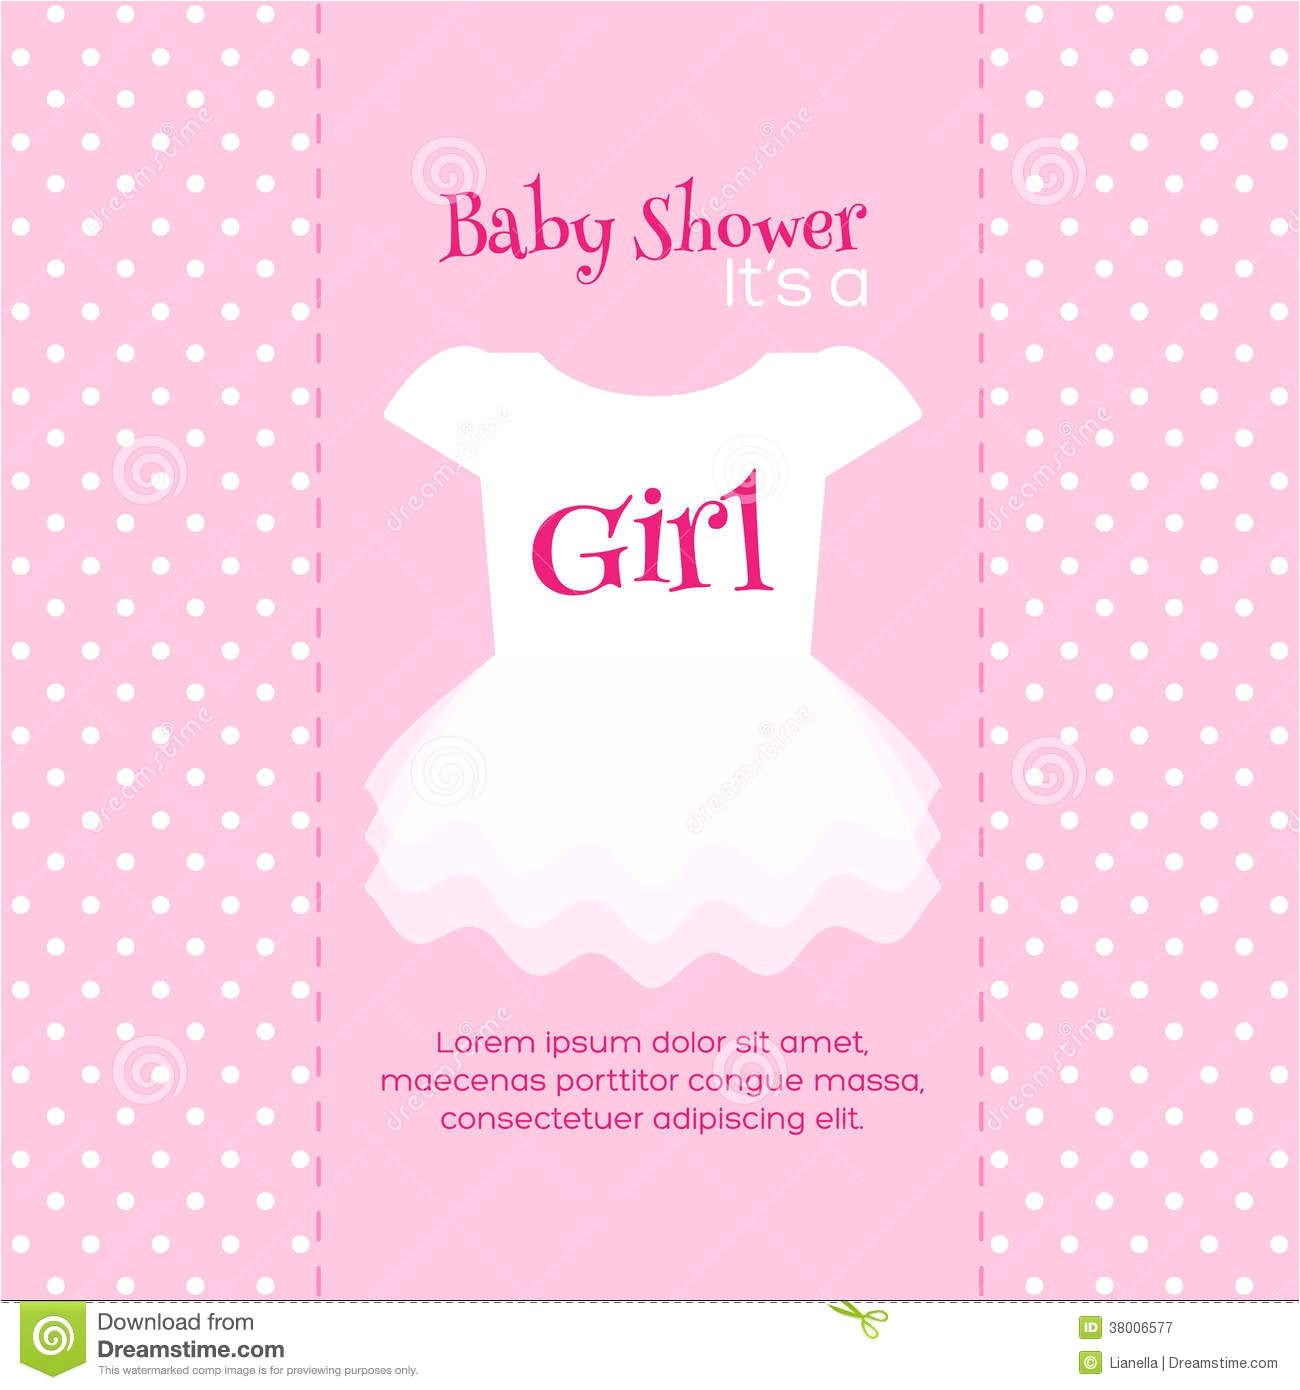 free baby shower invitation cards designs